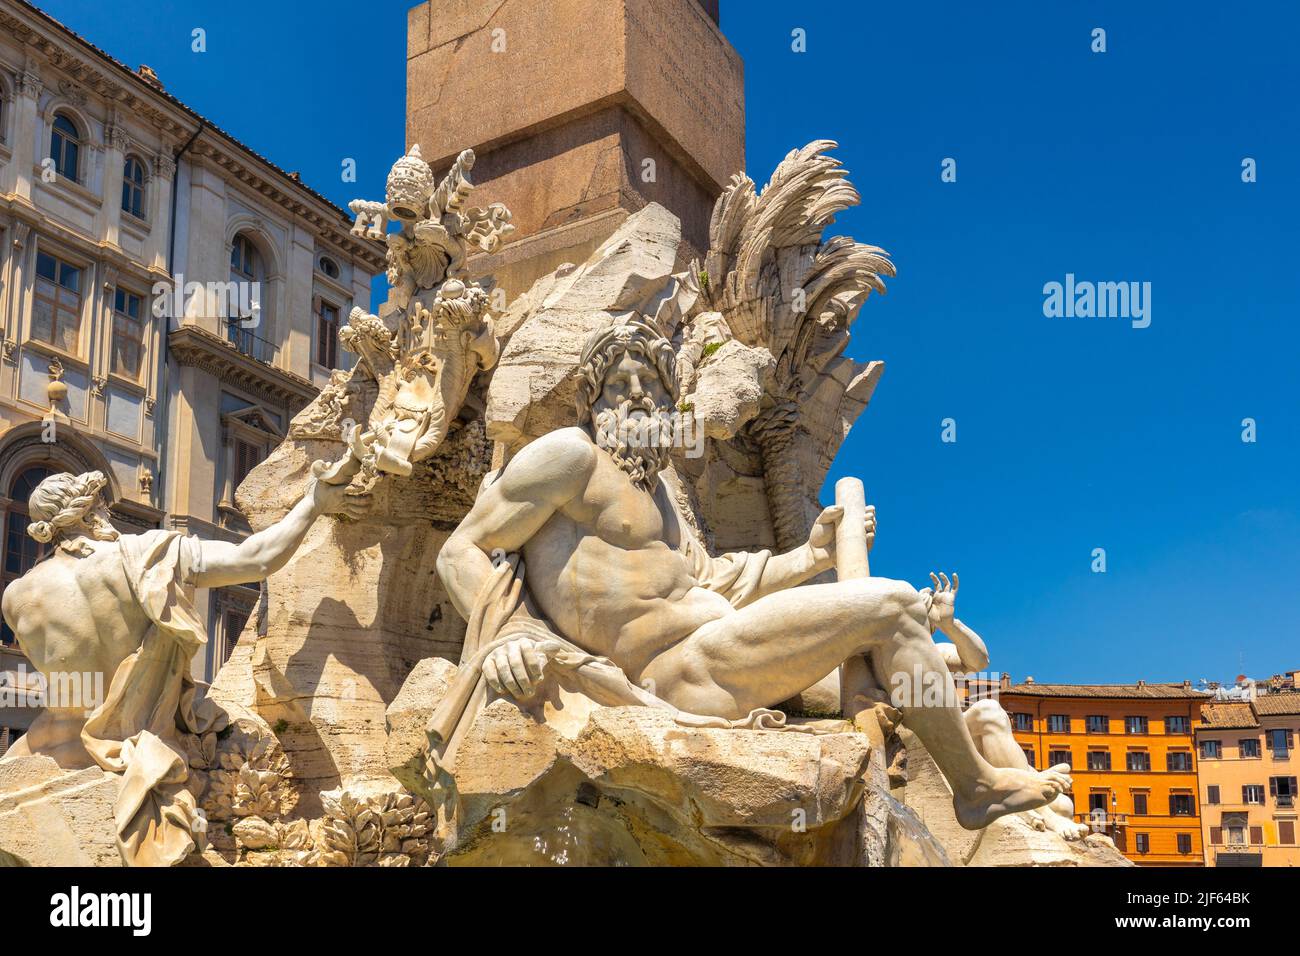 The Fountain of the Four Rivers in the Piazza Navona square in Rome, Italy, Europe. Stock Photo